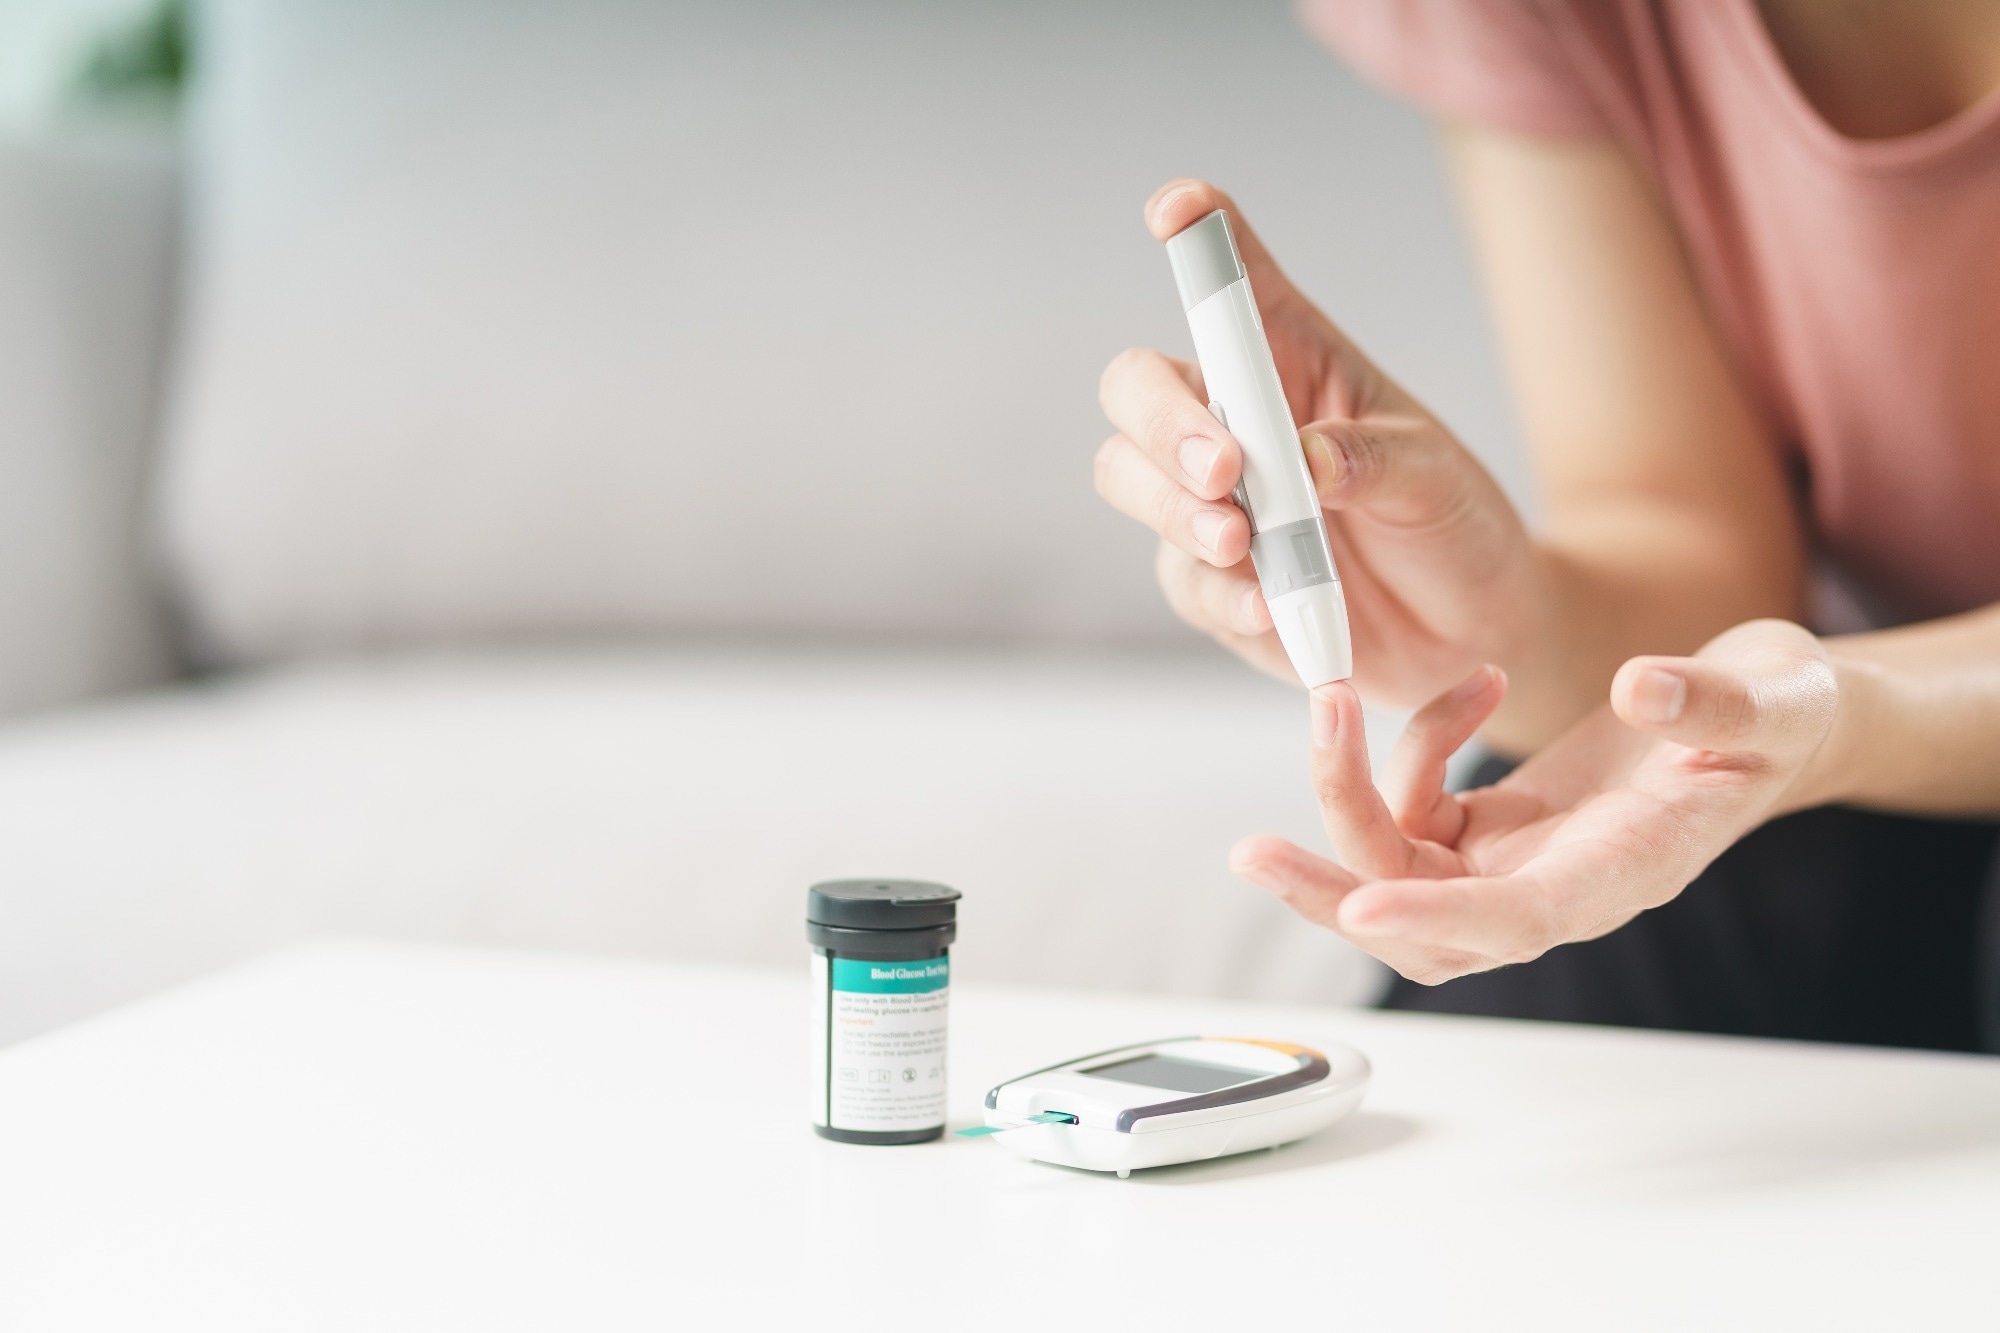 Study: Continuous glucose monitoring and intrapersonal variability in fasting glucose. Image Credit: Suriyawut Suriya / Shutterstock